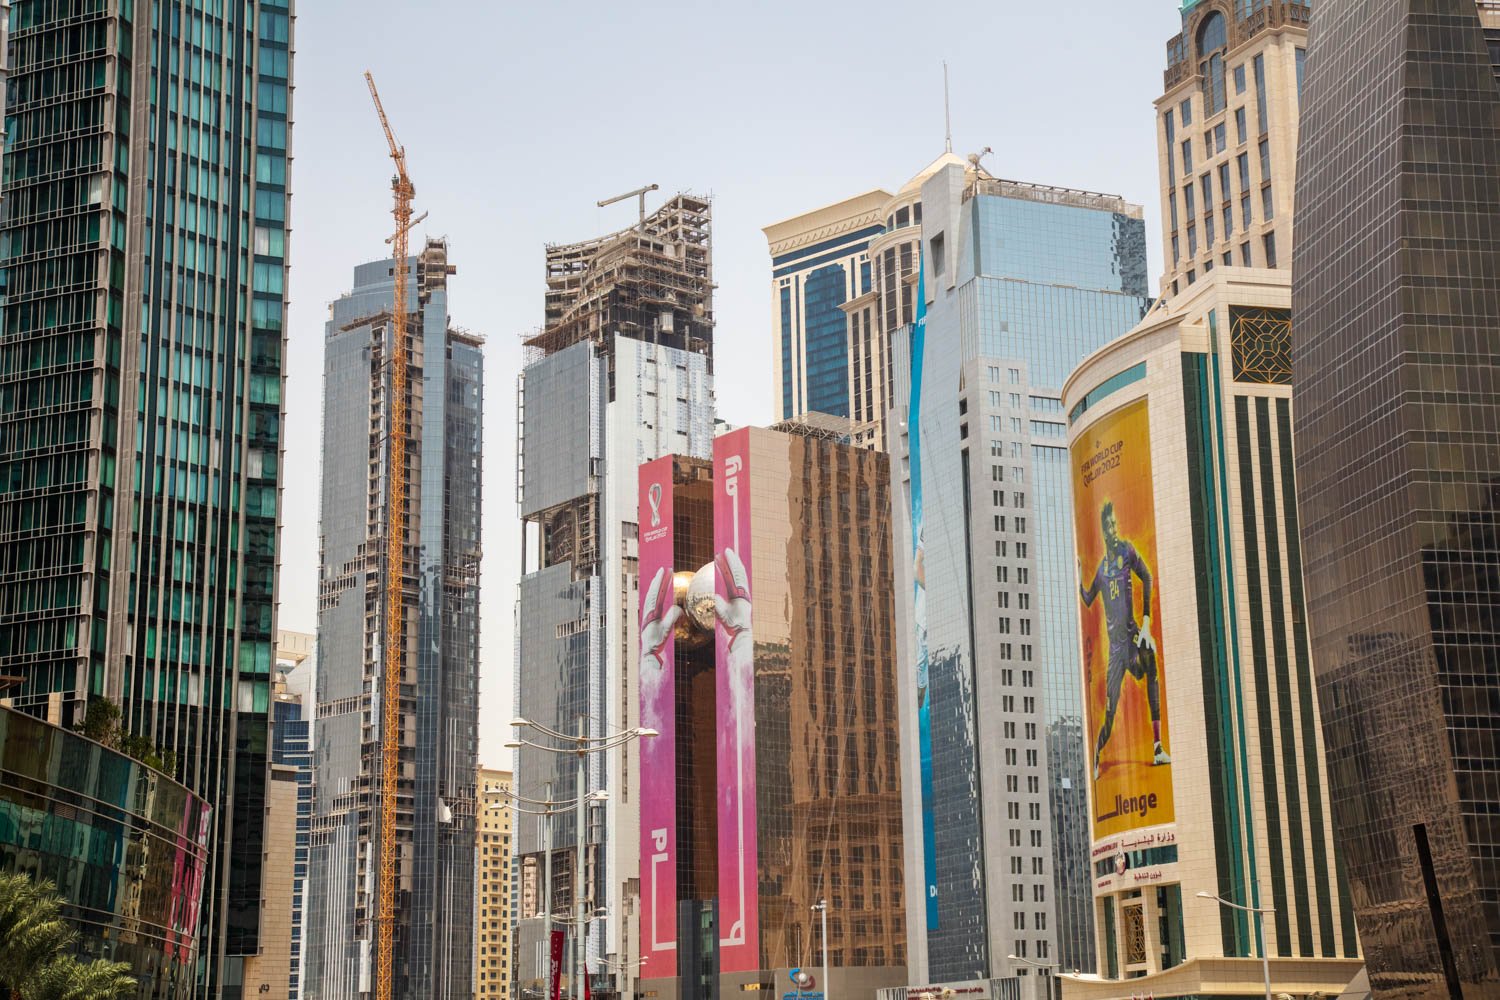  Views of downtown Doha, Qatar with prominent World Cup billboards plastered on modern skyscrapers on August 16, 2022. Tall luxury buildings are under construction.  